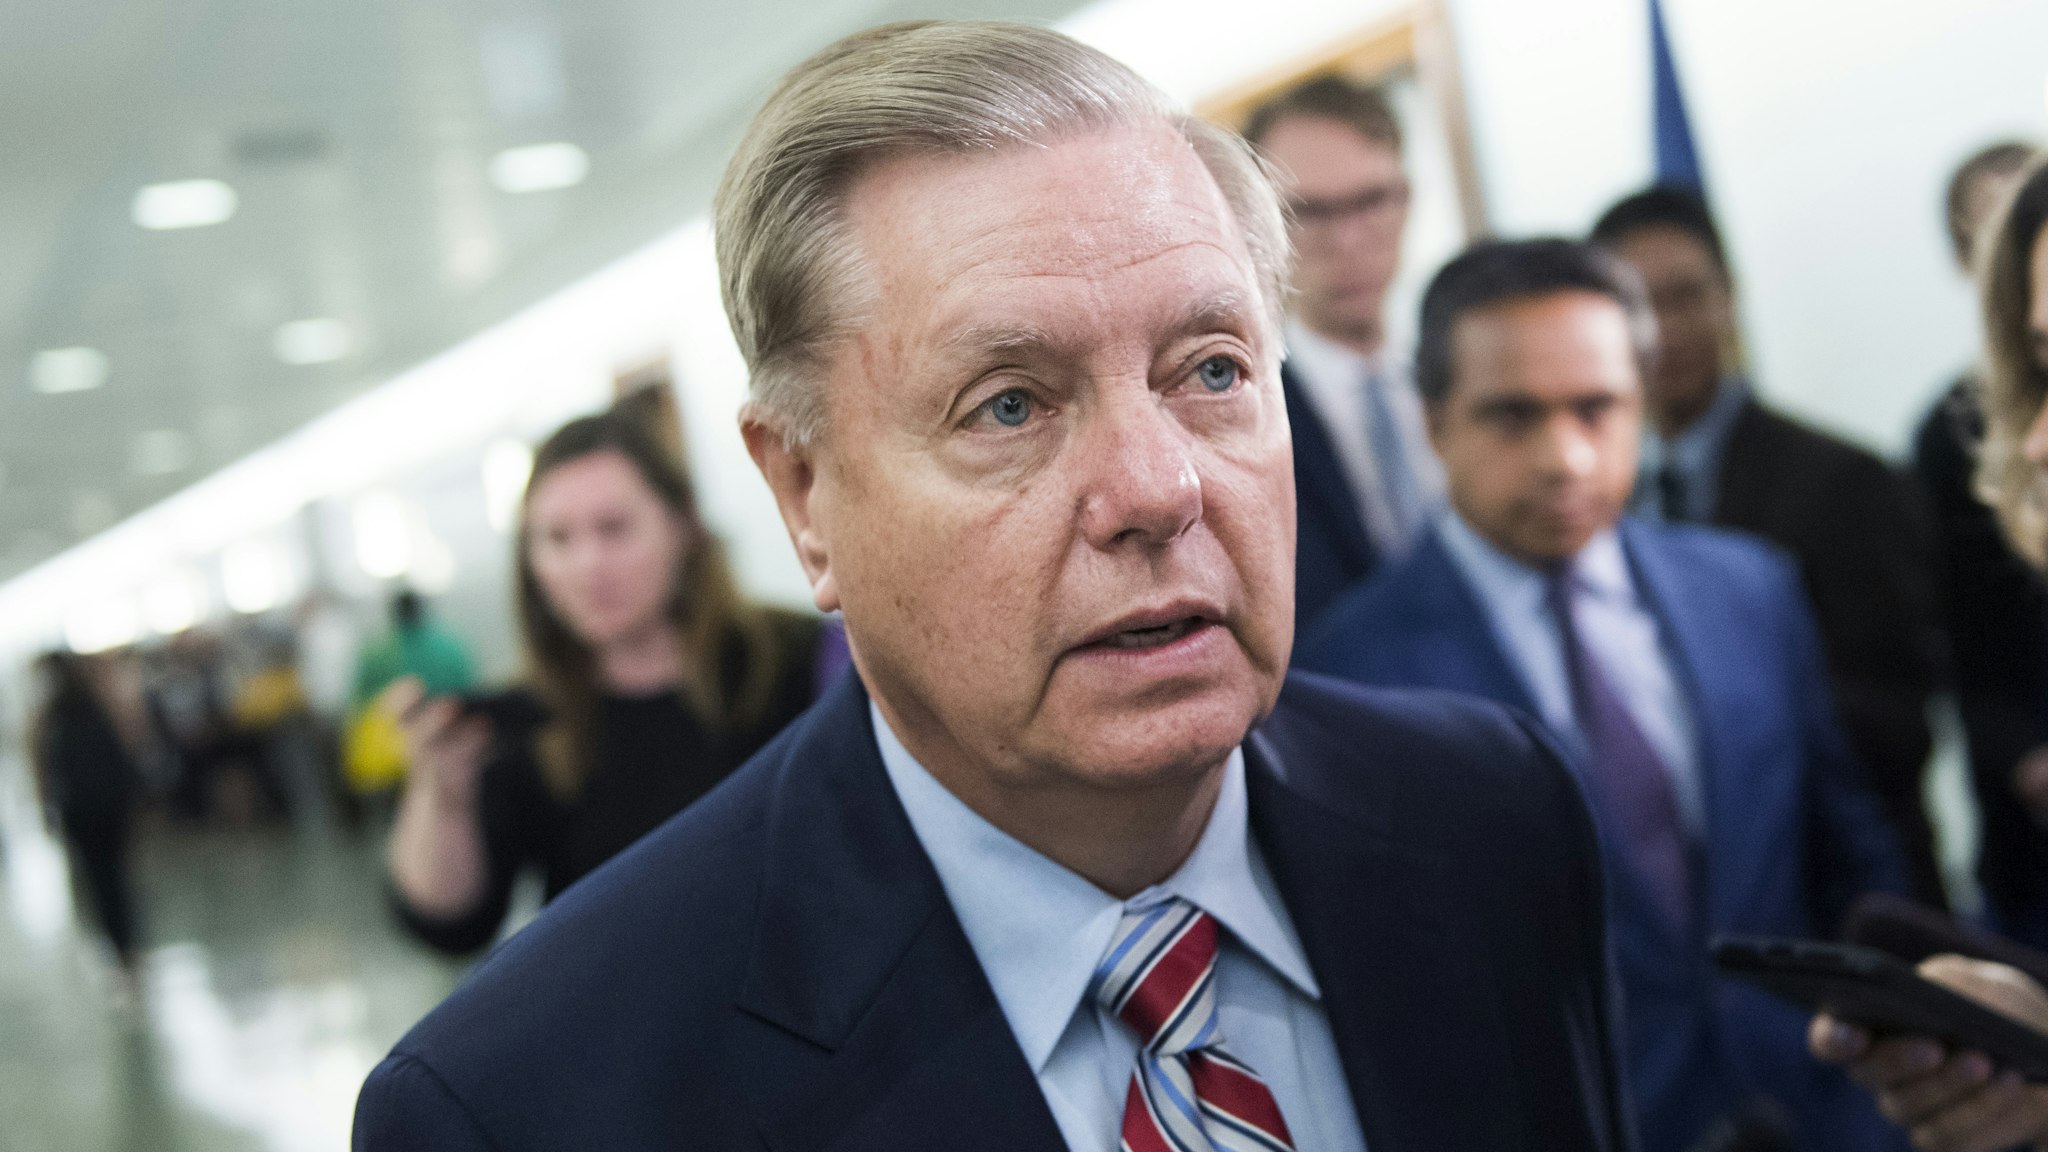 UNITED STATES - JULY 23: Chairman Lindsey Graham, R-S.C., arrives for the Senate Judiciary Committee hearing in Dirksen Building titled "Oversight of the Federal Bureau of Investigation," on Tuesday, JuLY 23, 2019. FBI Director Christopher Wray, testified.